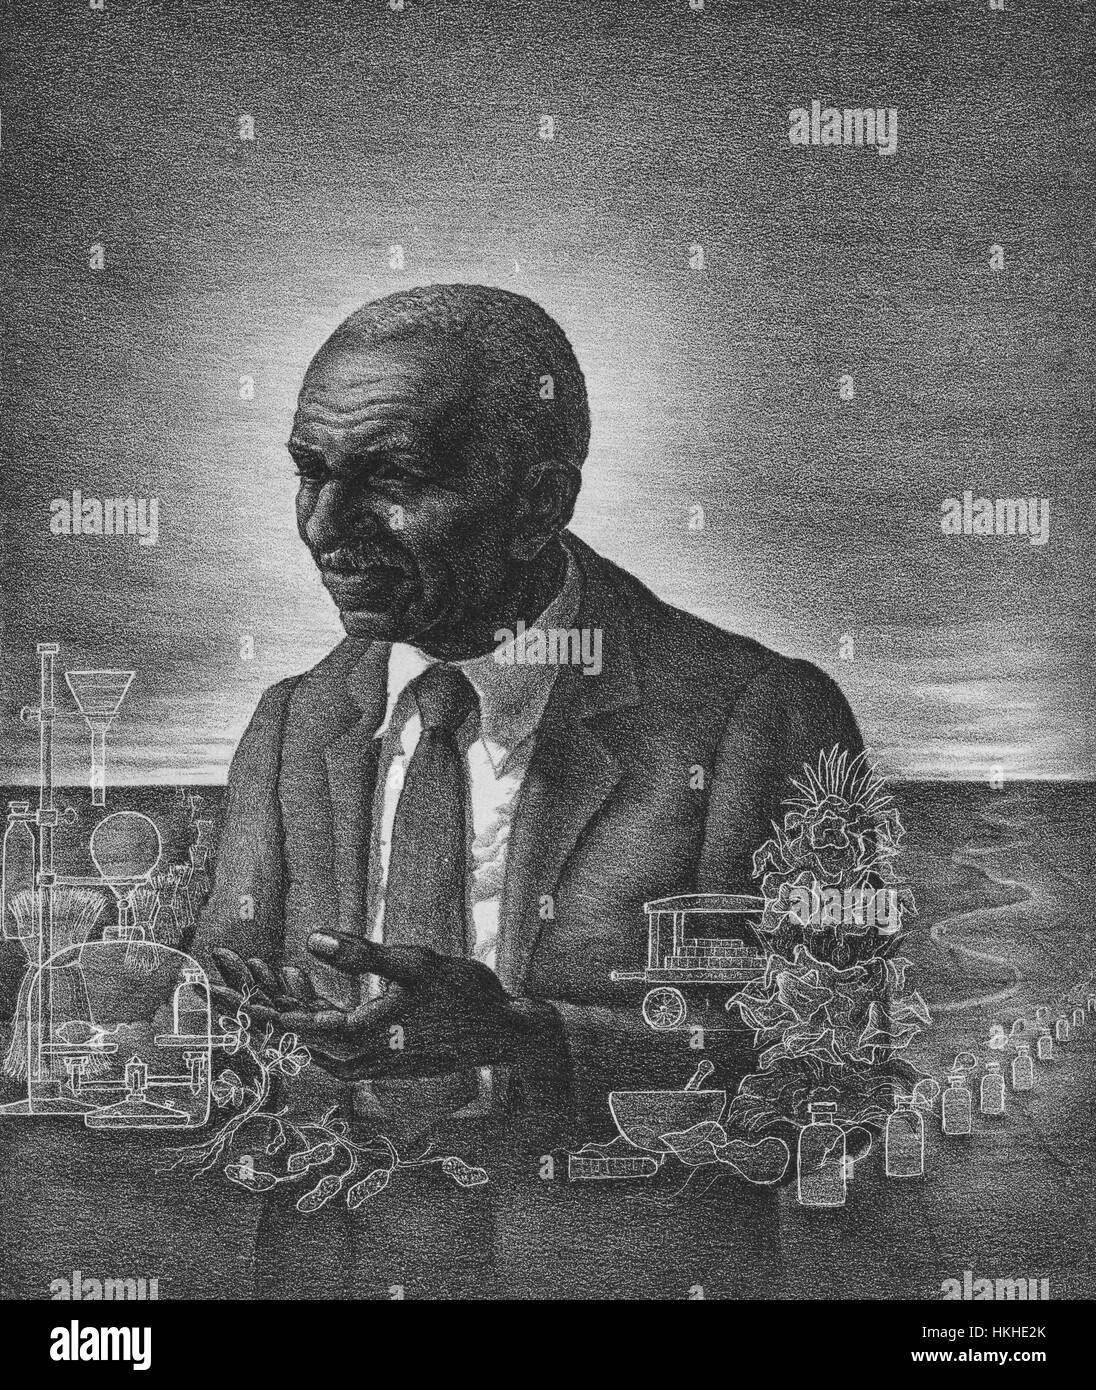 An etching from a portrait of George Washington Carver, he was an American botanist and inventor, he was born a slave and was raised by his former owners after slavery was abolished, he promoted the planting of alternative crops to cotton that would aide farmers both nutrtionally and financially, he also promoted the idea of crop rotation in order to restore minerals and nutrients to the soil, his image is surrounded by transparent illustrations of free floating scientific equipment and plants, 1939. From the New York Public Library. Stock Photo